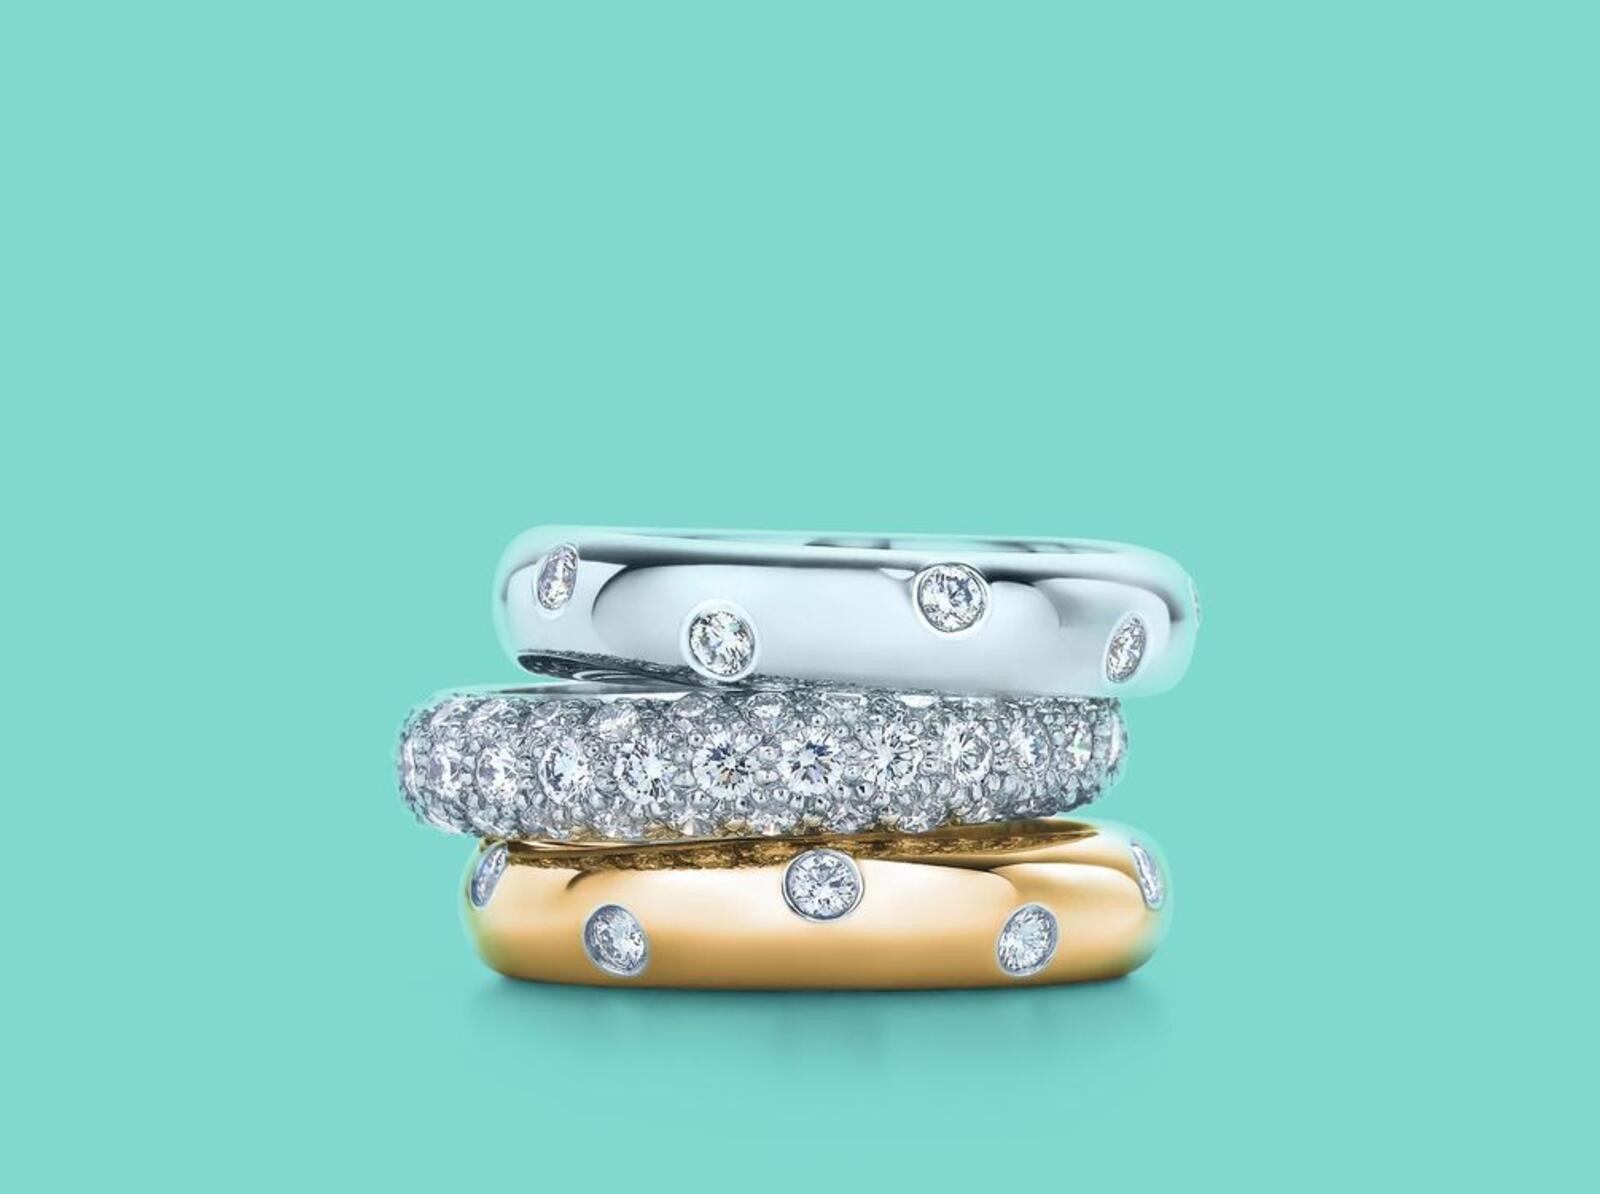 Wallpapers rings jewelry style on the desktop